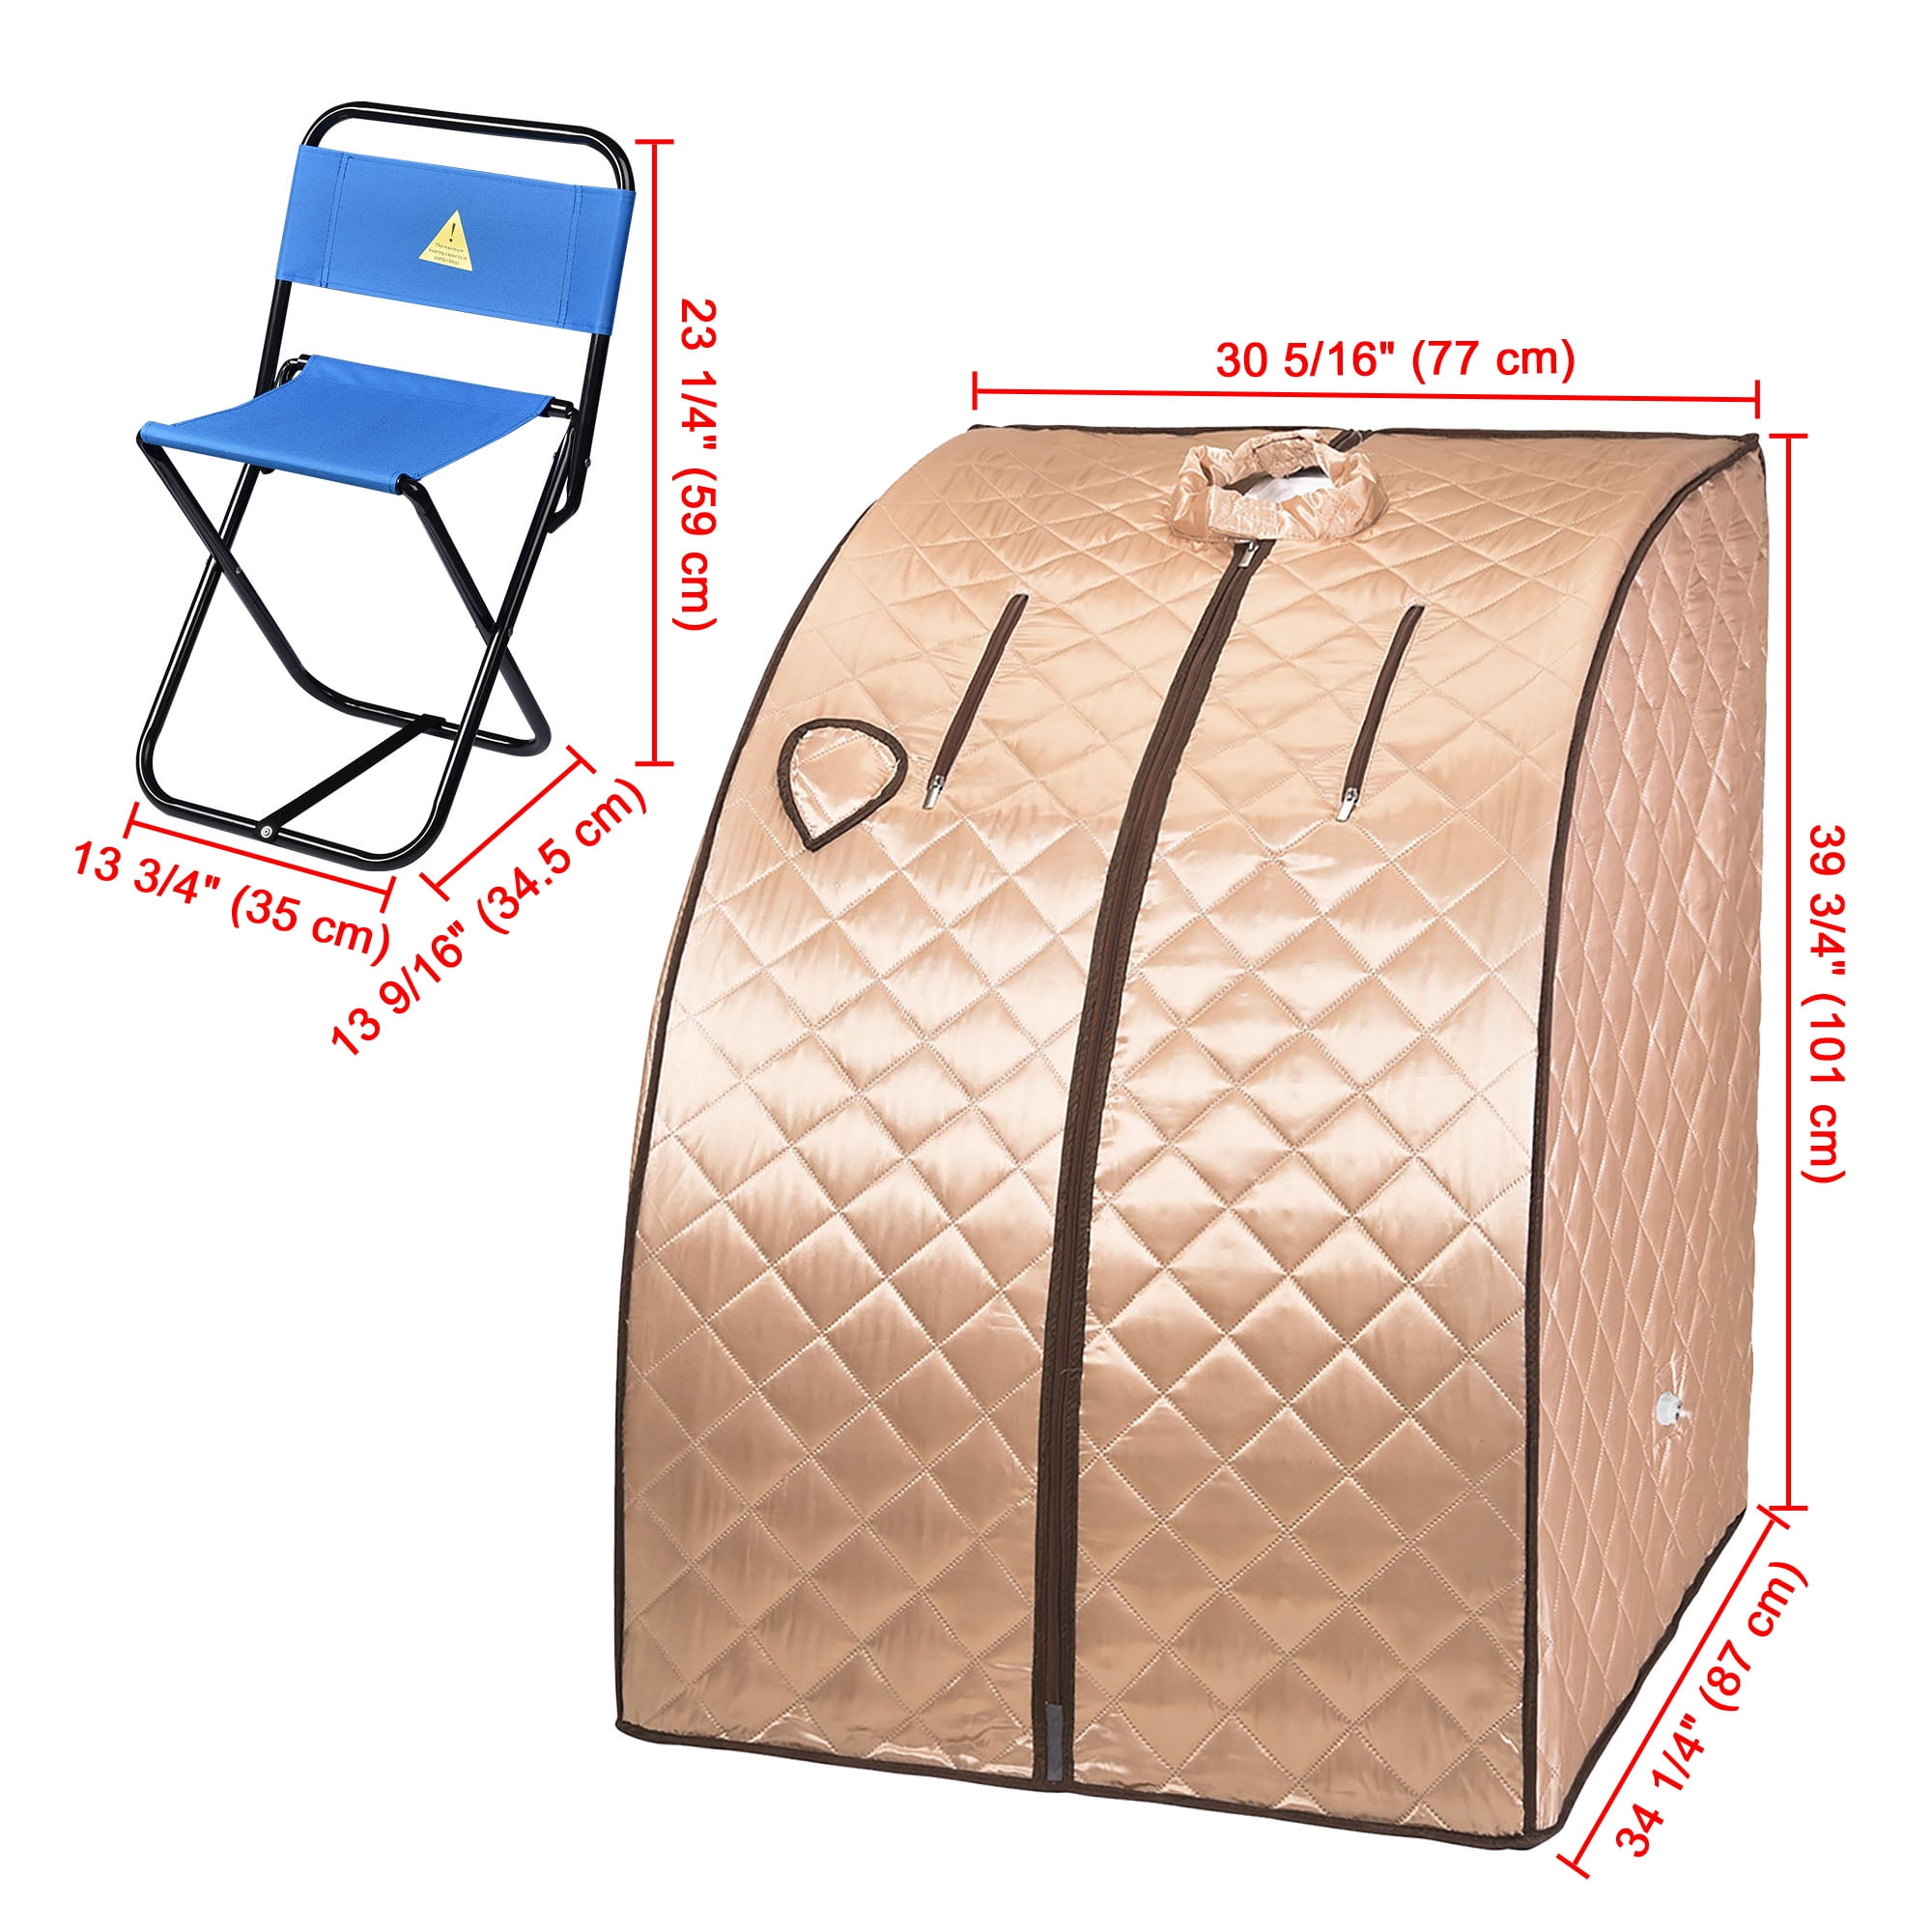 Details about   2L Portable Folding Steam Sauna SPA Loss Weight Detox Therapy Body Slim Relax ~~ 